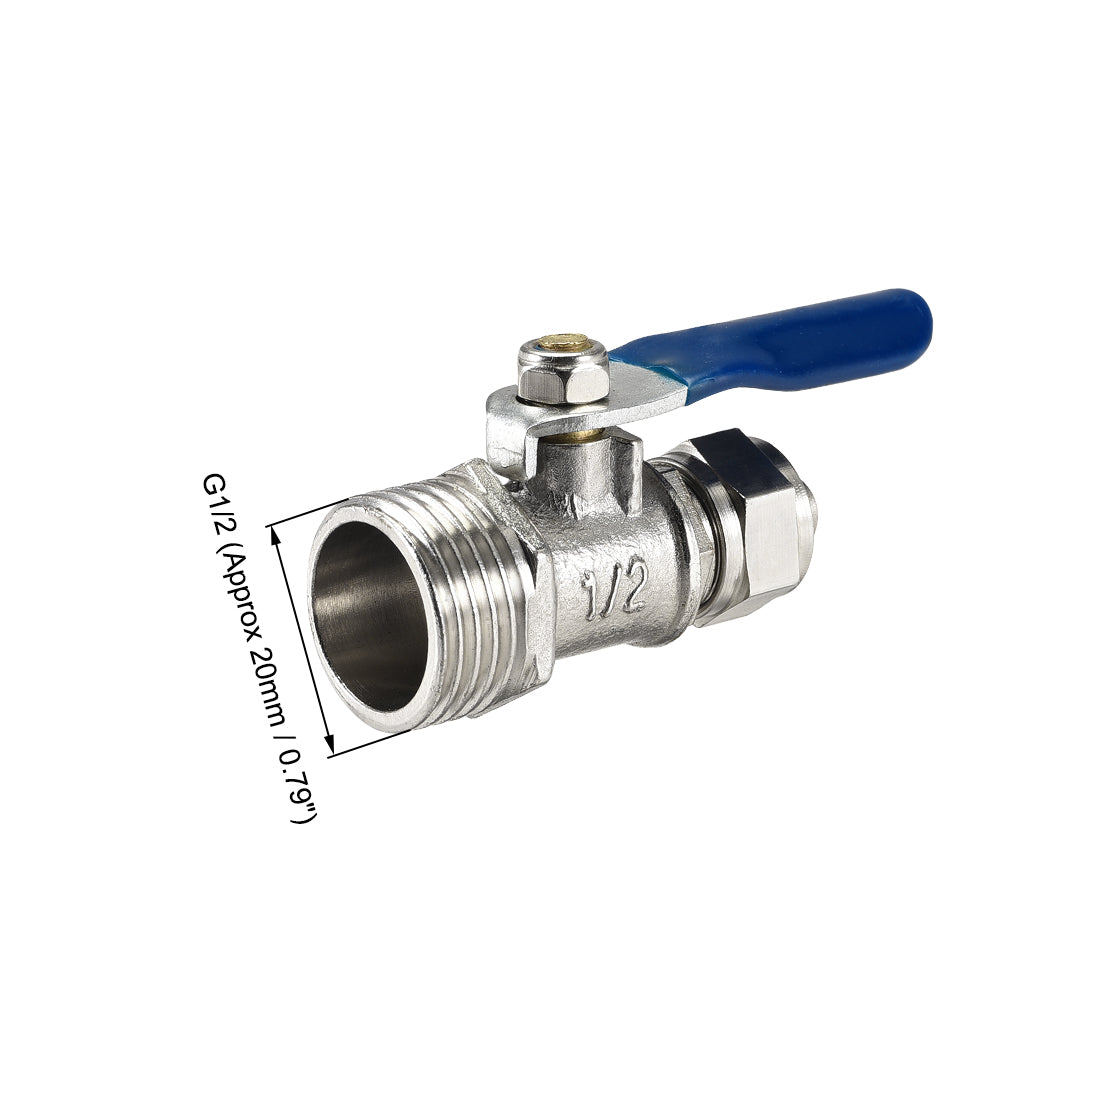 Uxcell Uxcell Ball Valve Water Switch, G1/2 Male Thread, 10mm OD Tube, Nickel Plated Brass, for Water Purifiers